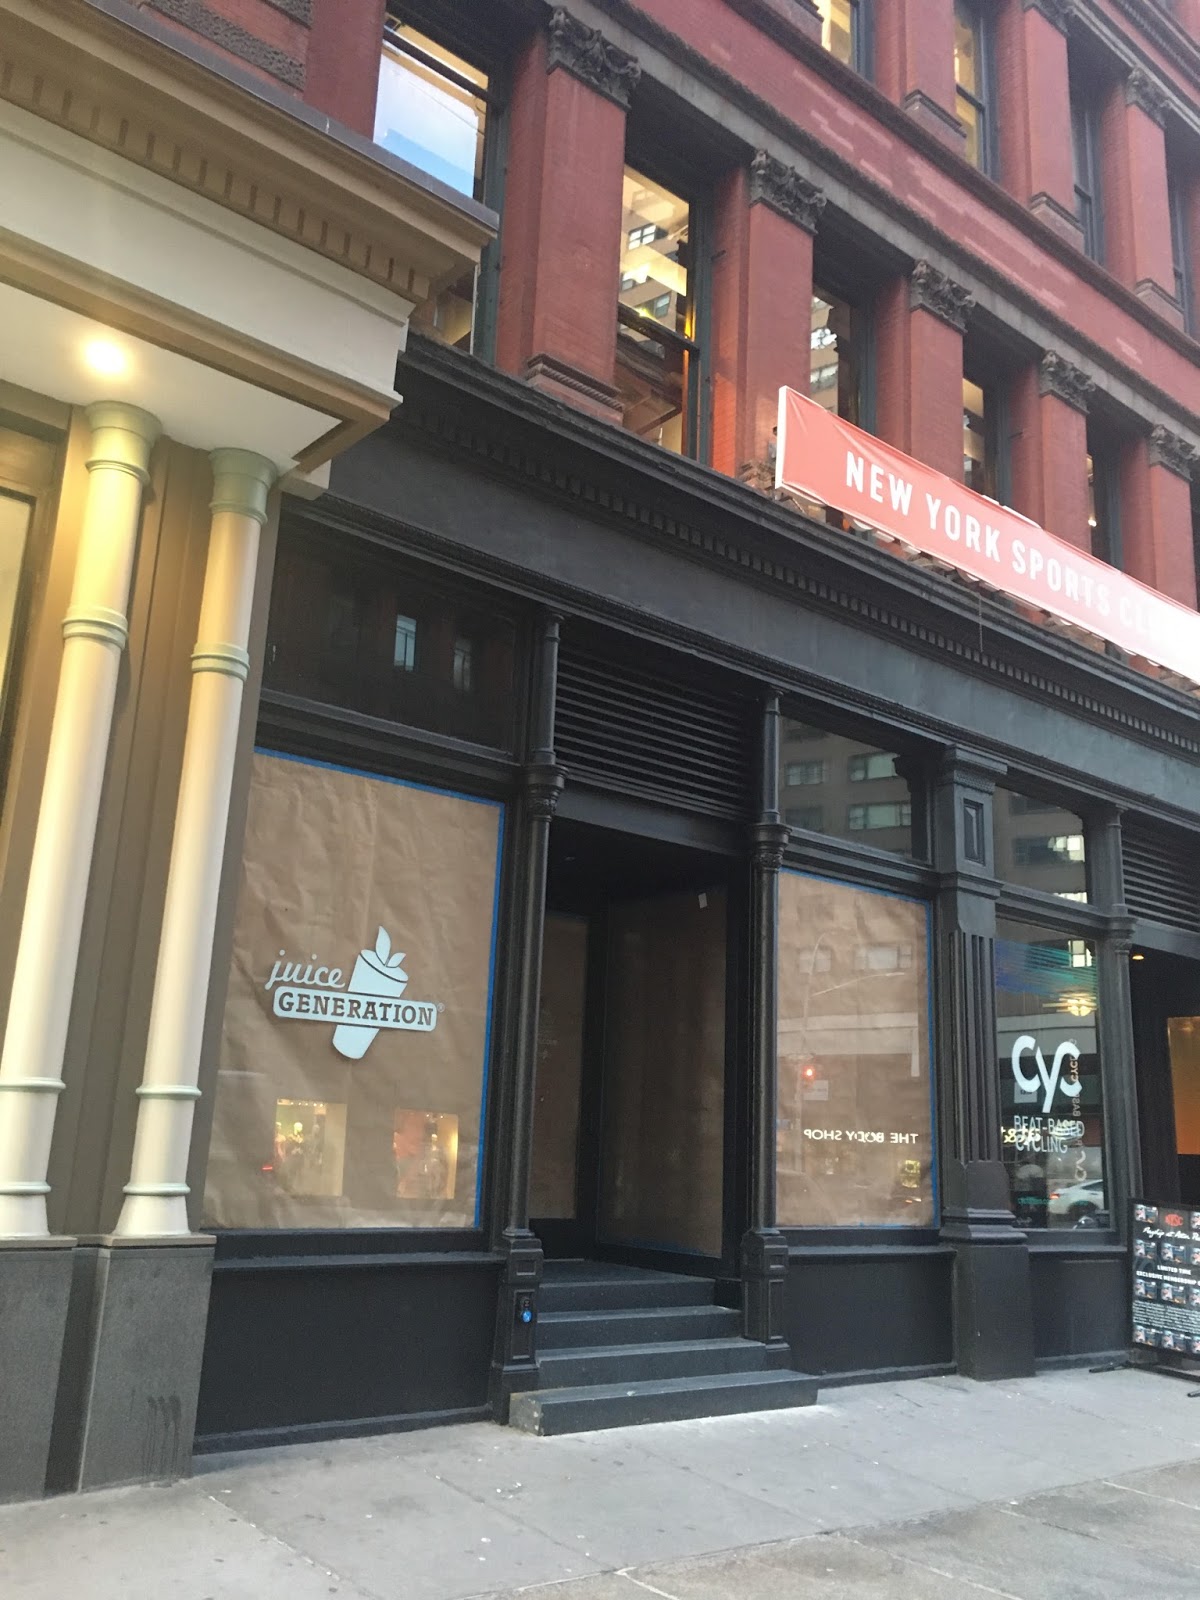 EV Grieve: About the Juice Generation opening soon on Astor Place